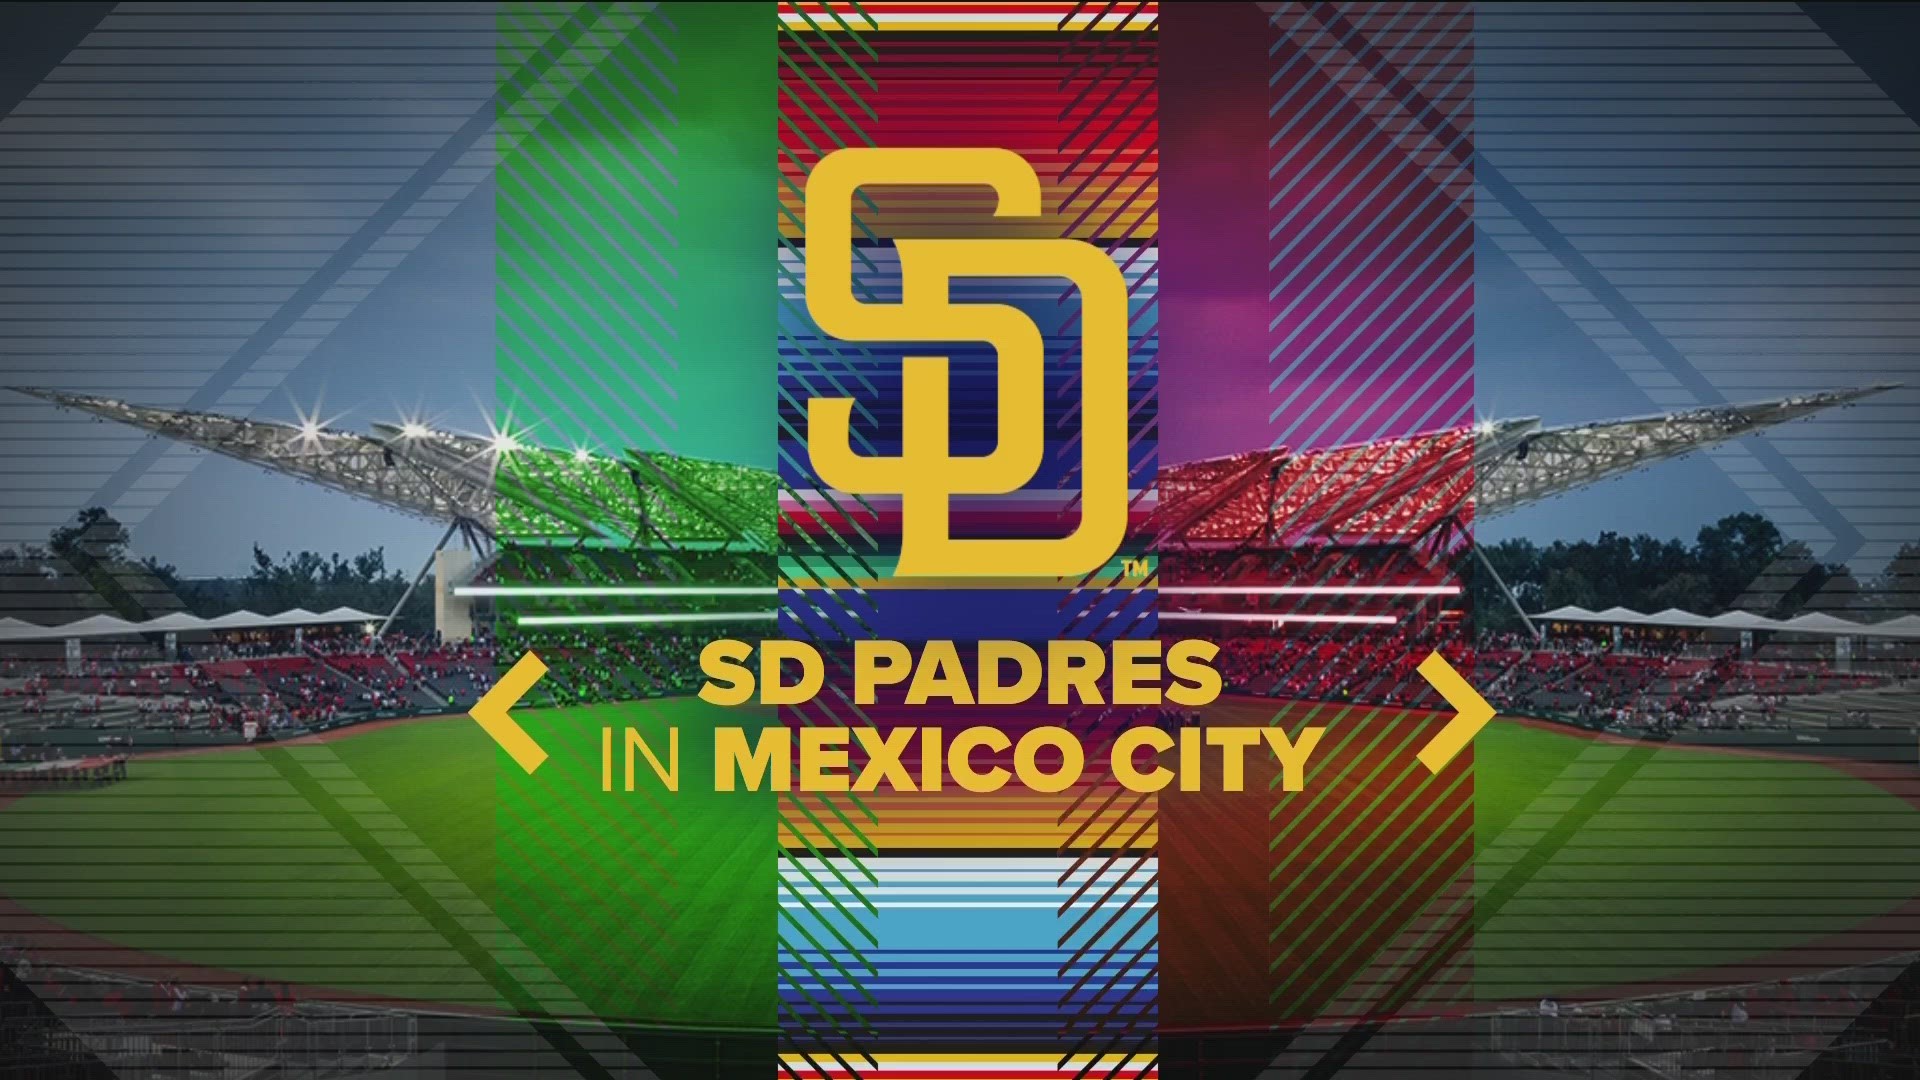 The Padres face off against the Giants this weekend in the first ever in-season MLB series in Mexico City.